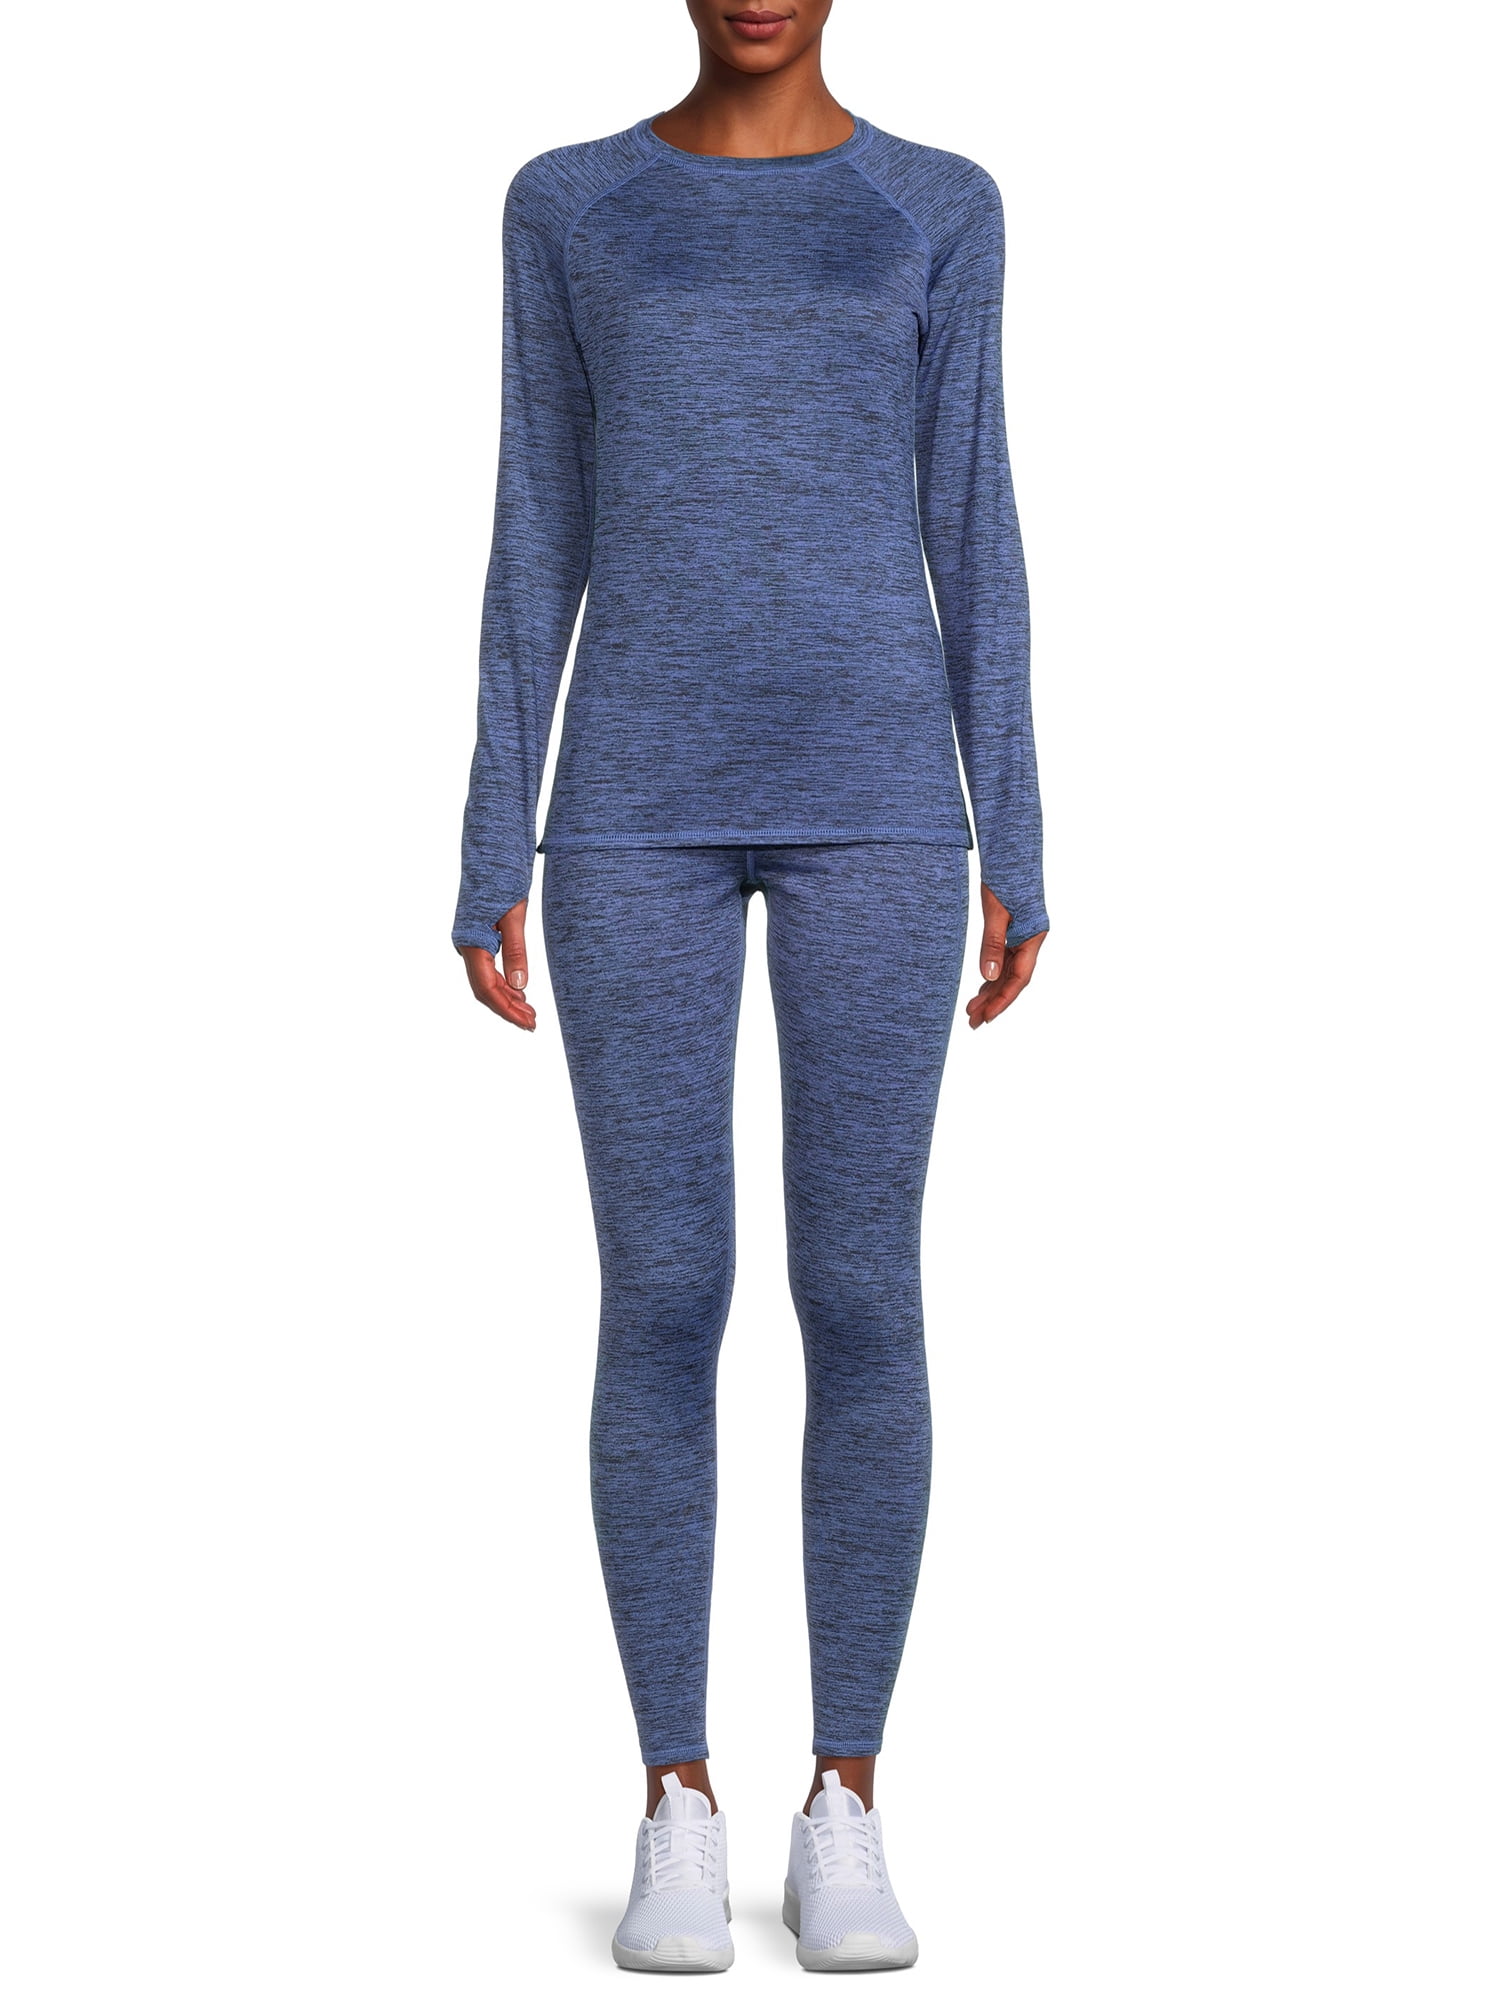 ClimateRight by Cuddl Duds Women's Plush Warmth Base Layer Thermal